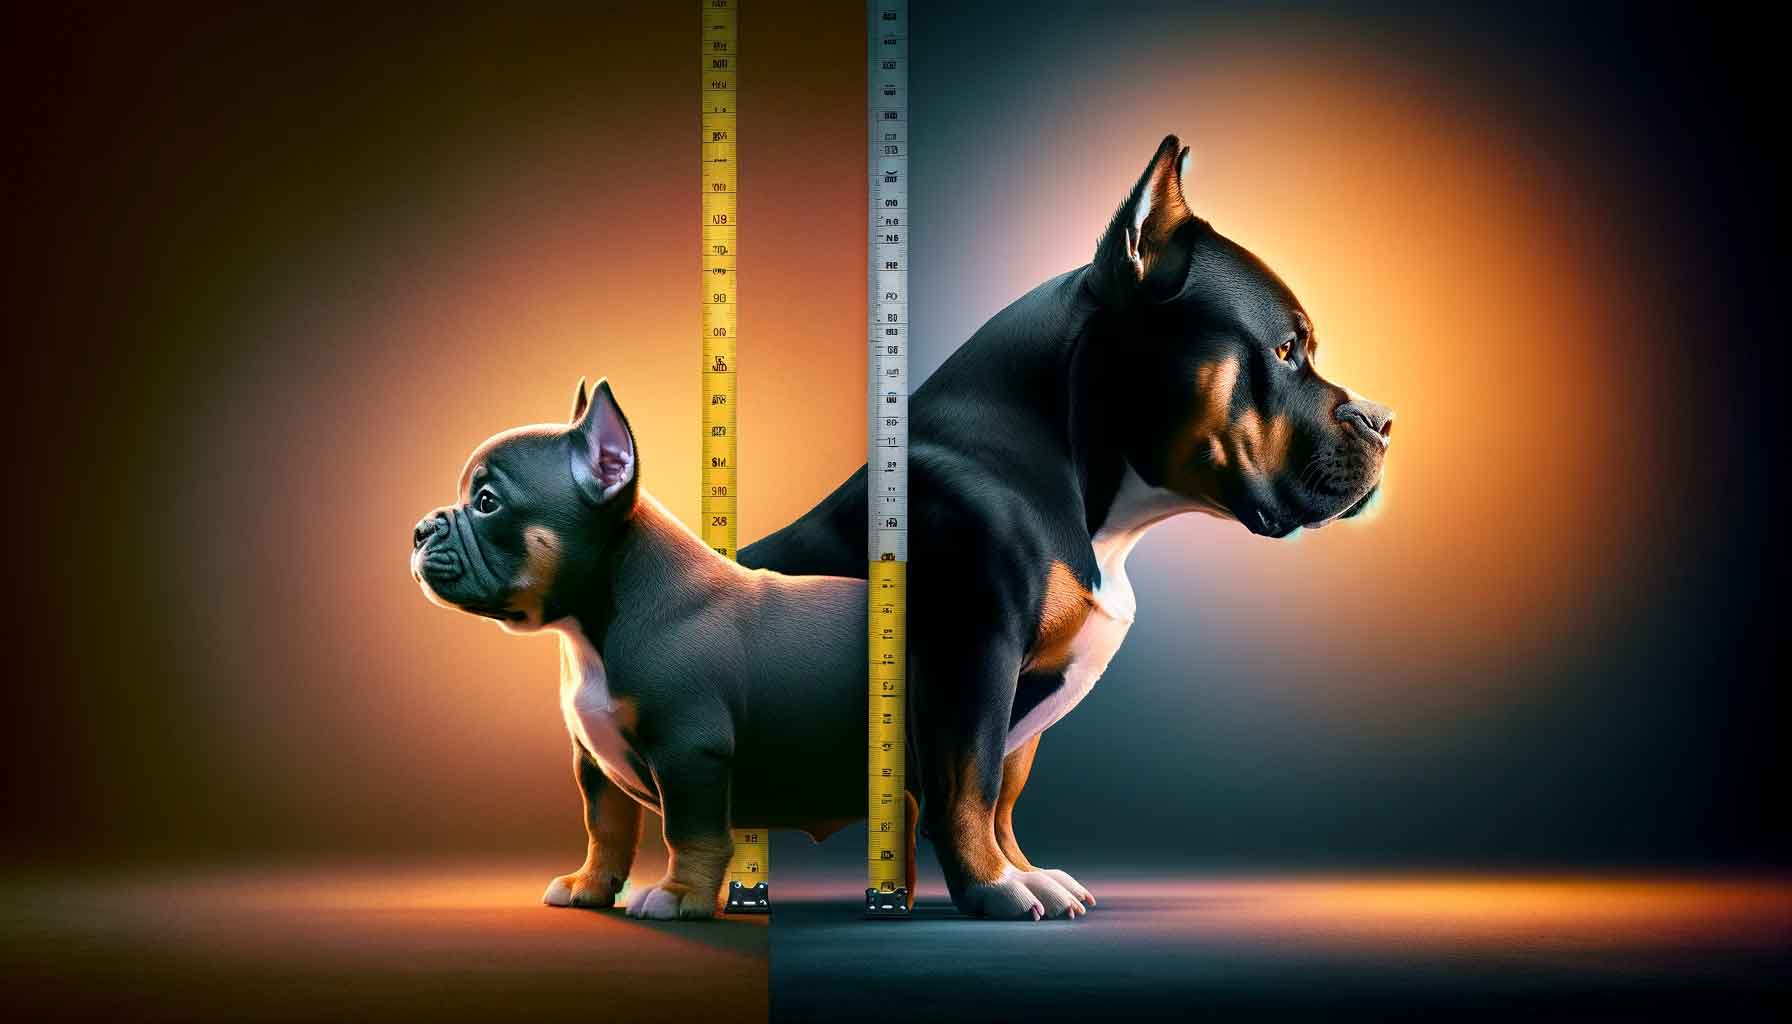 A composite photograph displaying an American Bully vs Micro Bully in profile, with a measuring tape highlighting the height difference. The background's gradient from warm to cool tones symbolizes their common ancestry but different breed standards, contrasting their physical stature.